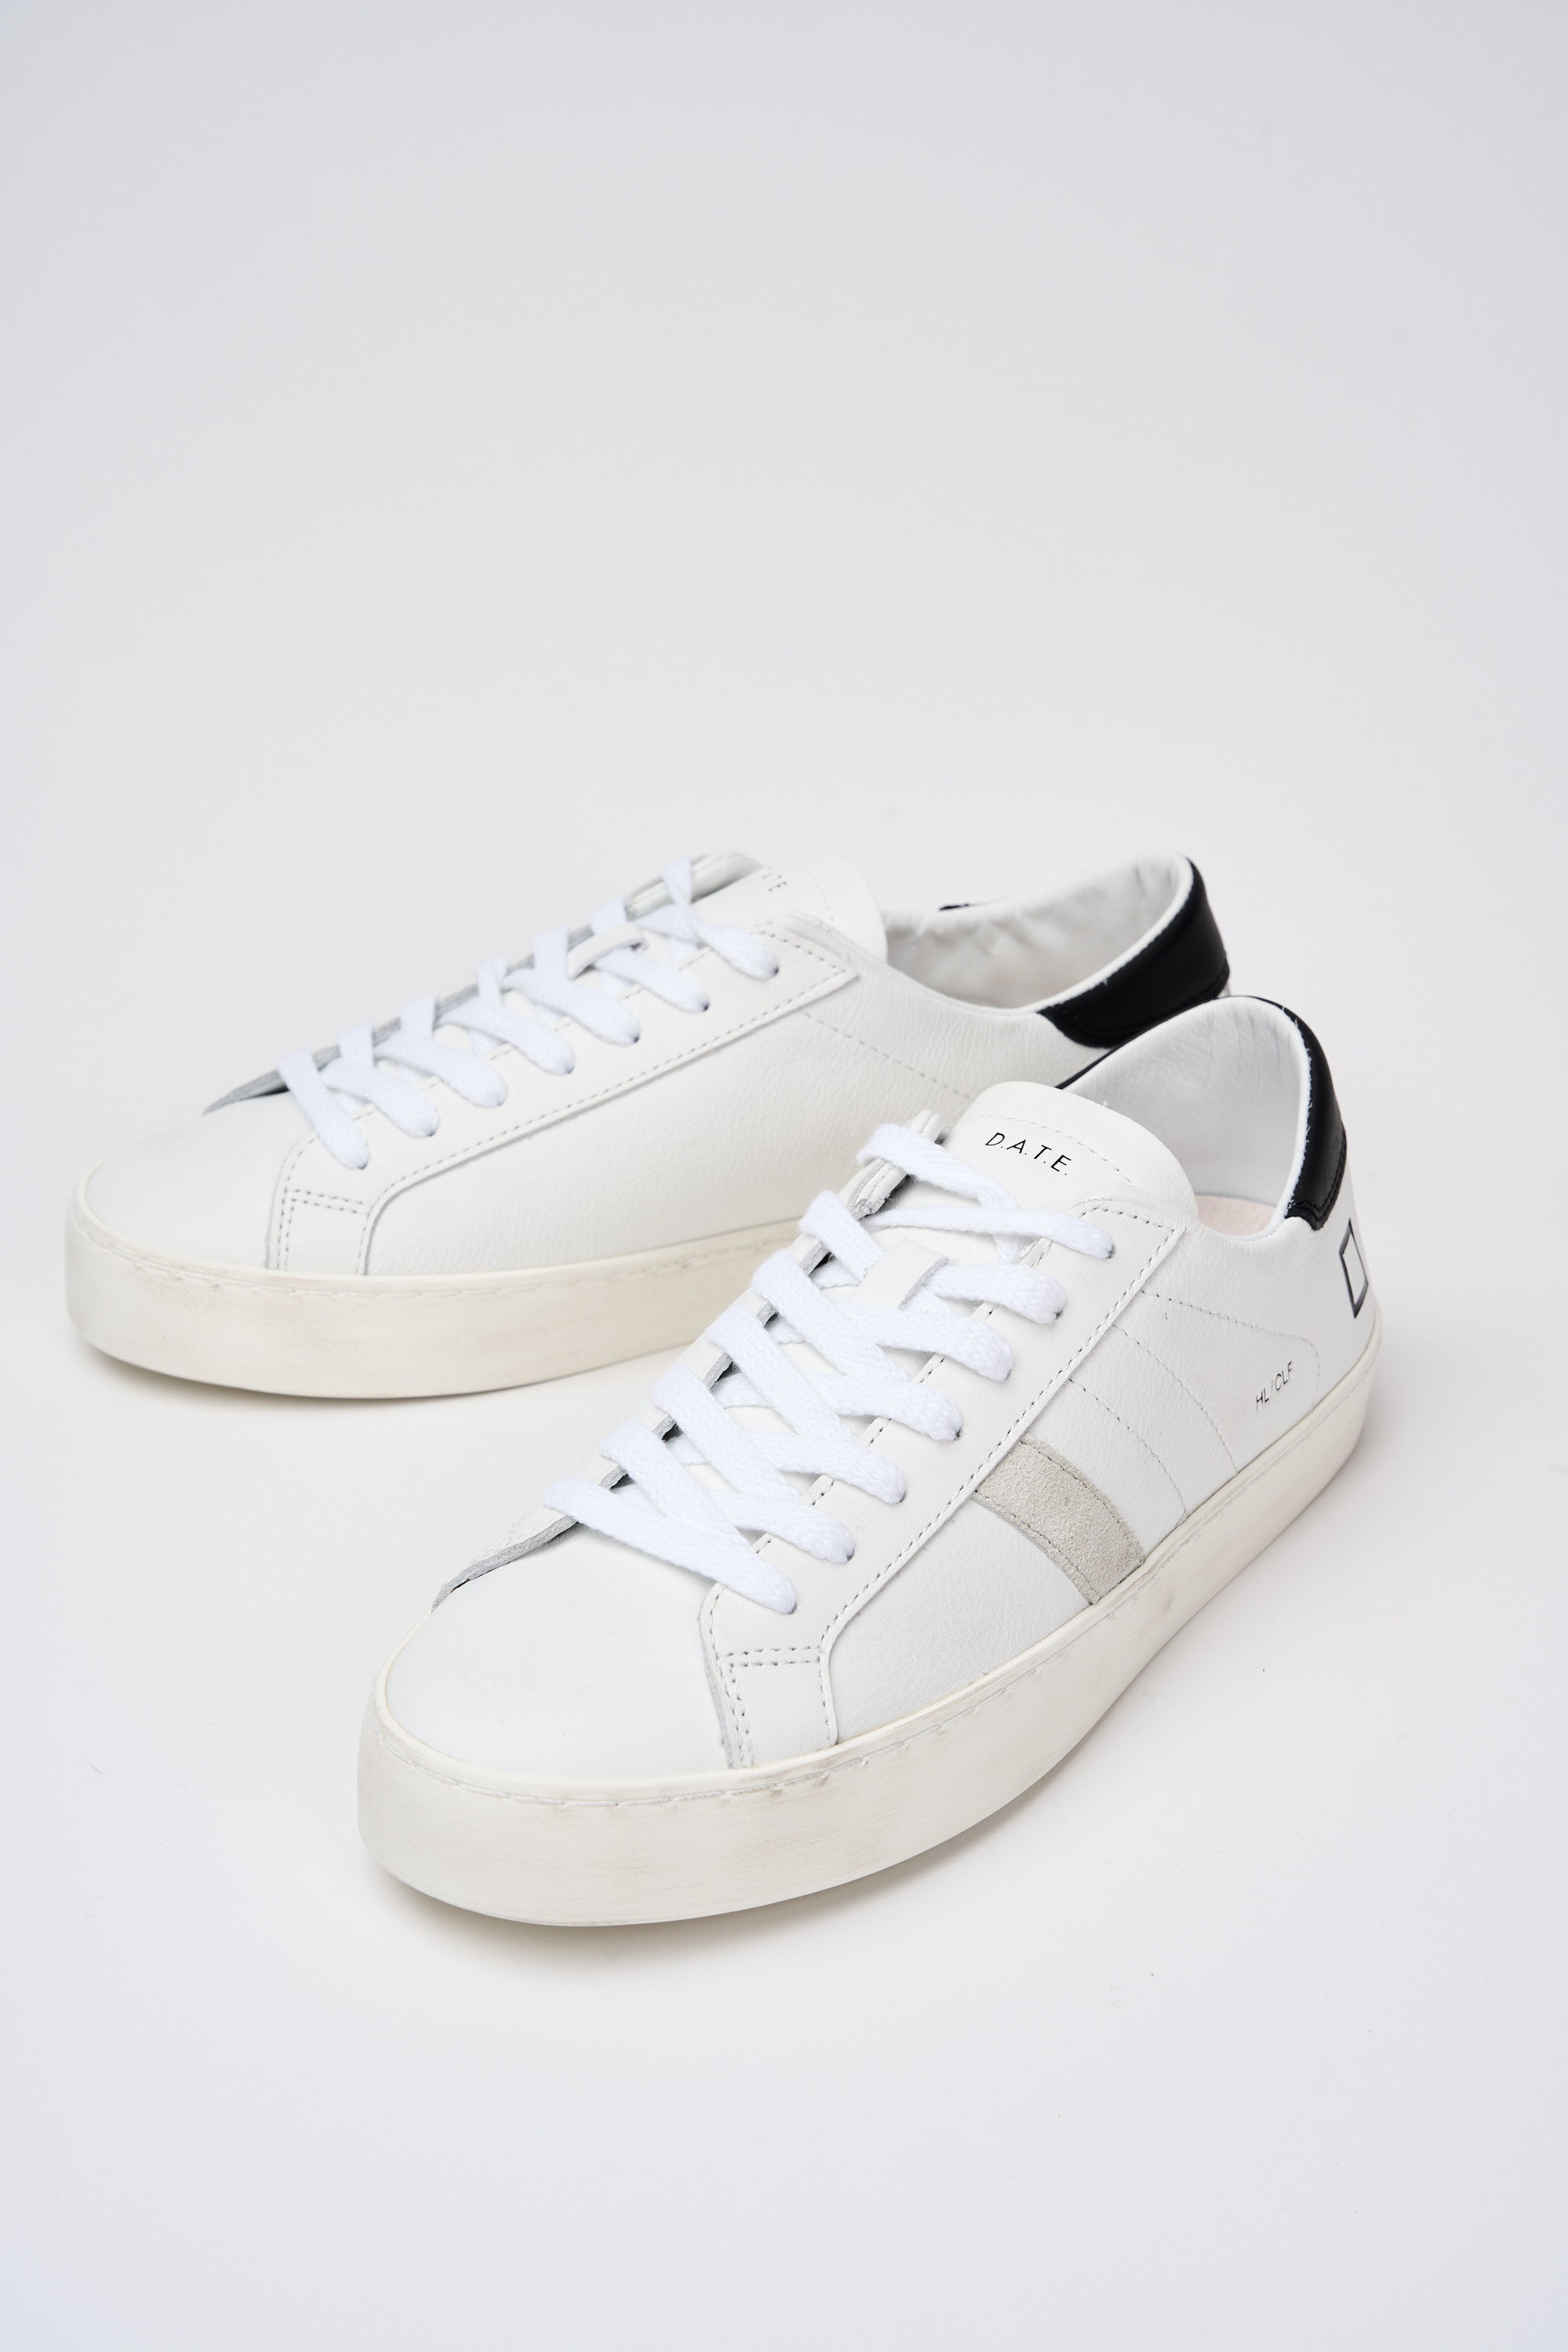 D.A.T.E. Sneaker Hill Leather/Suede White/Black-7